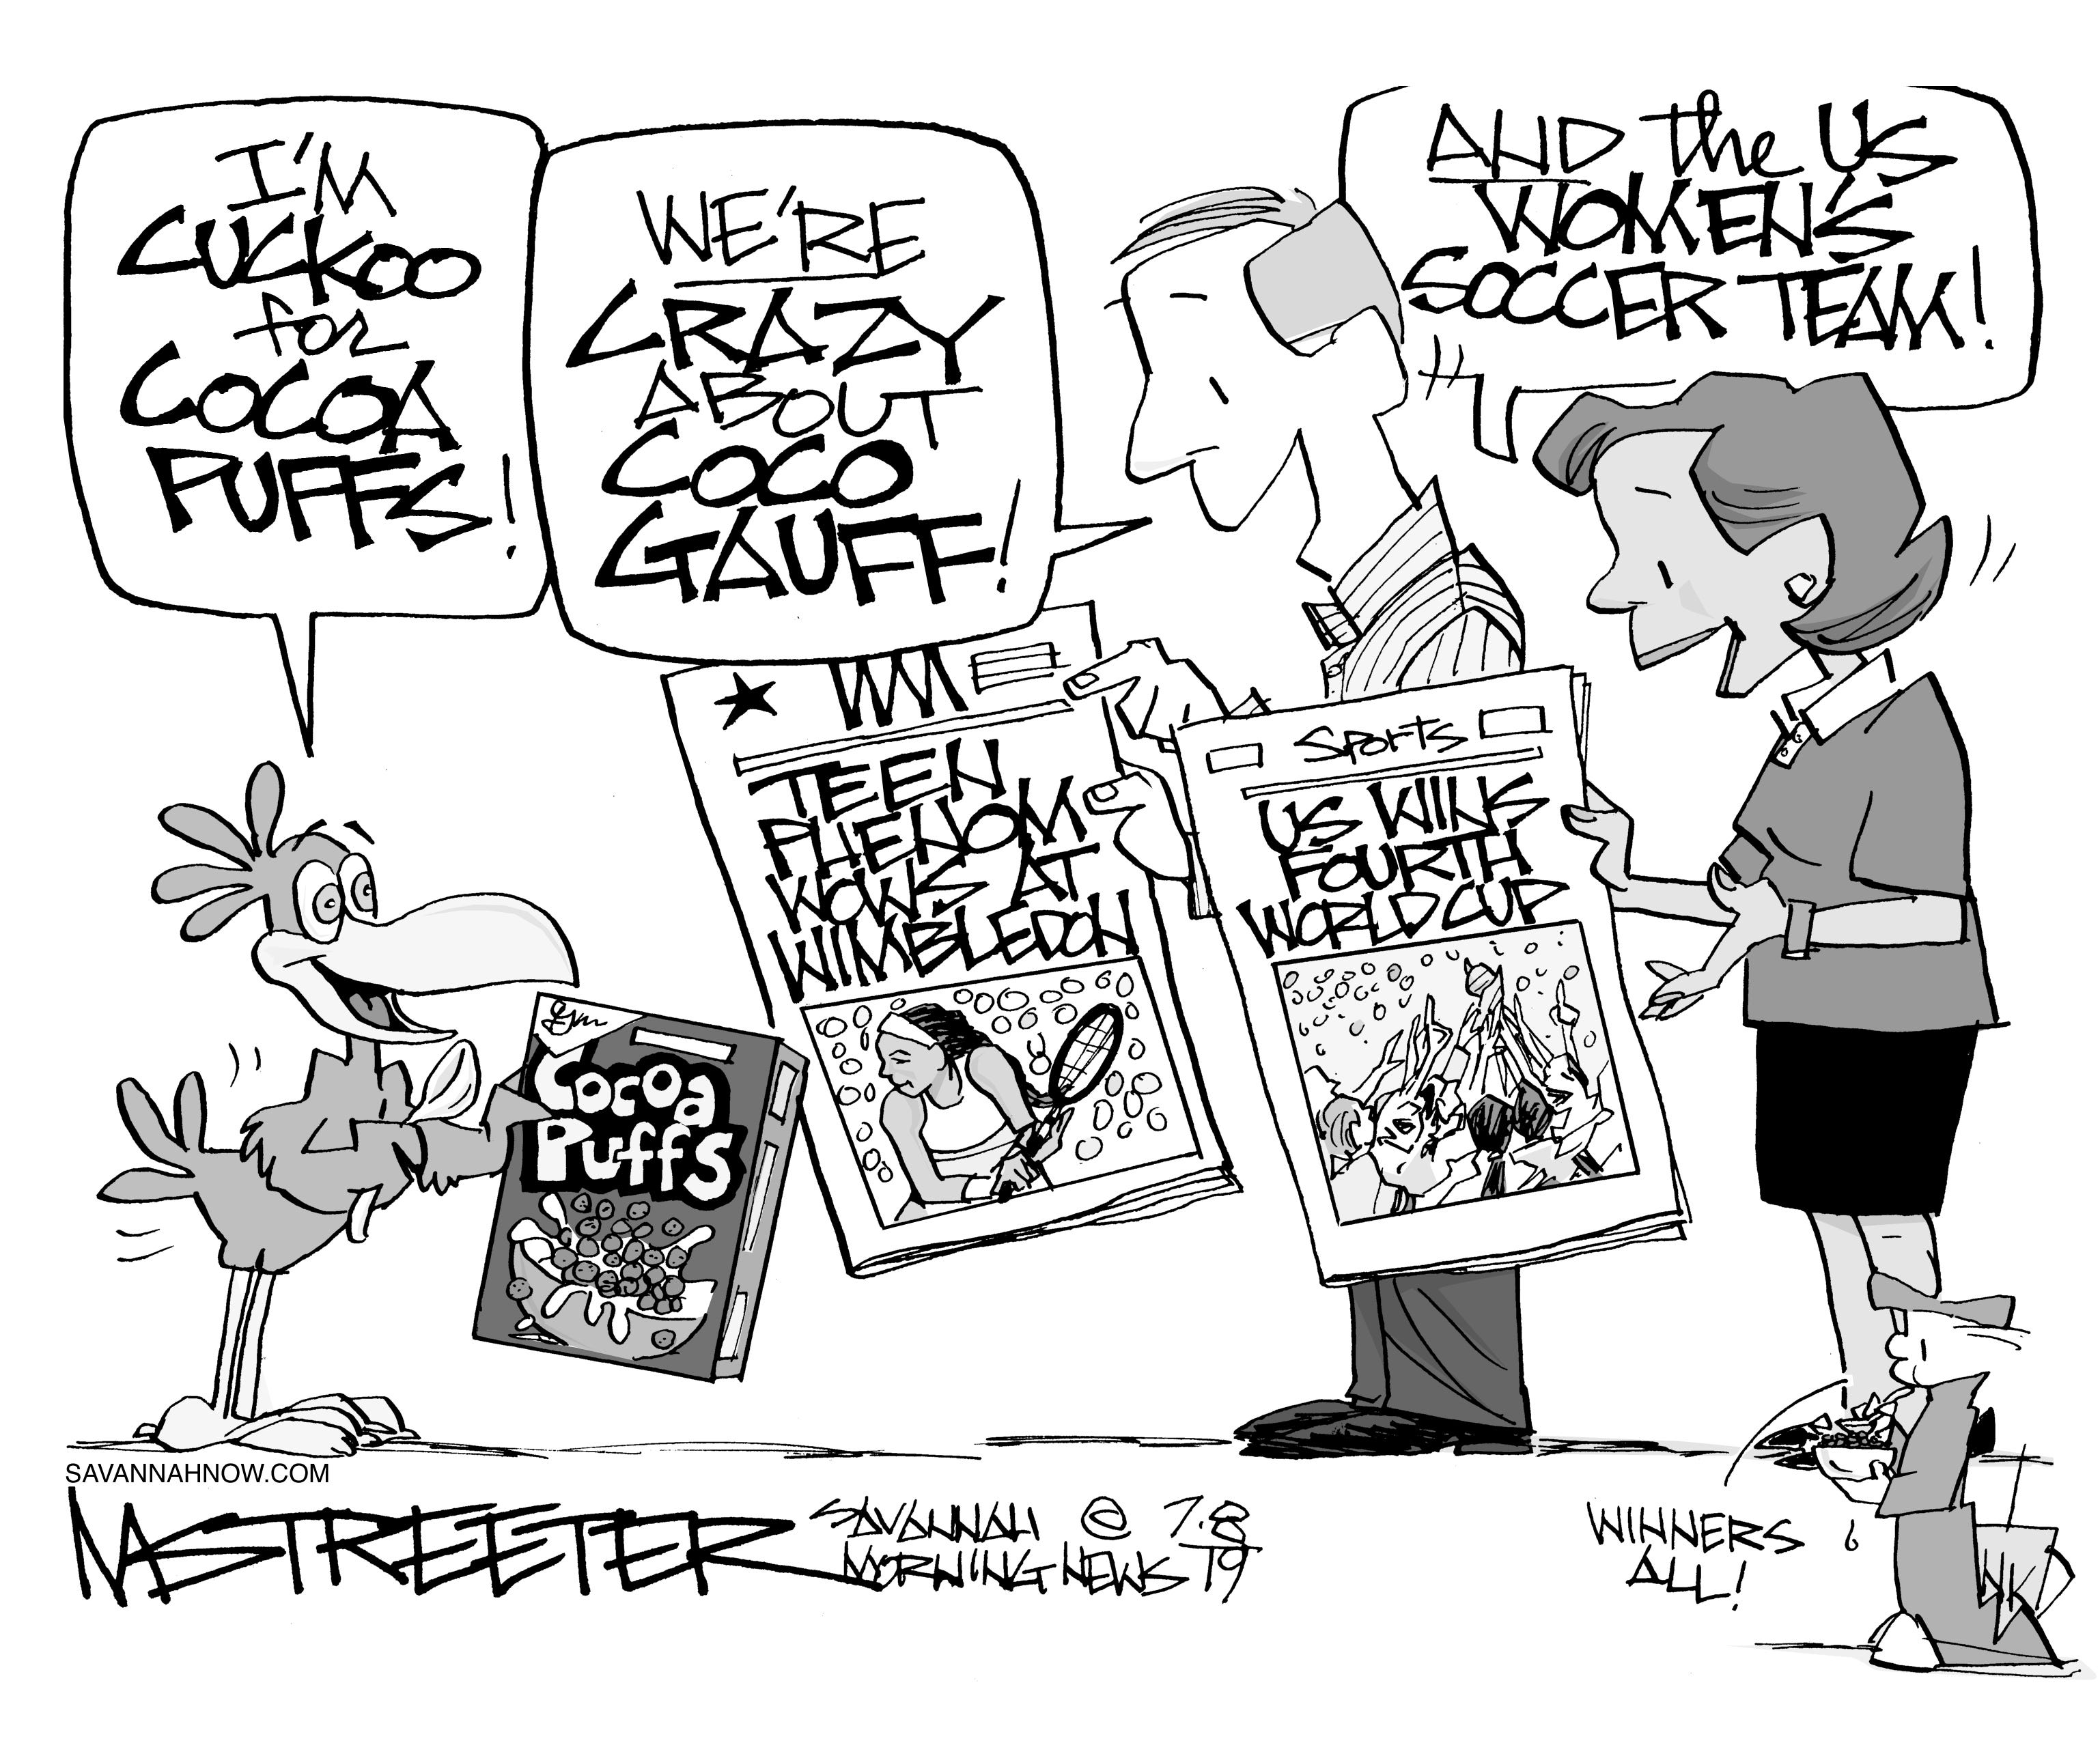 Streeter cartoon: And Equal Pay For Better Play